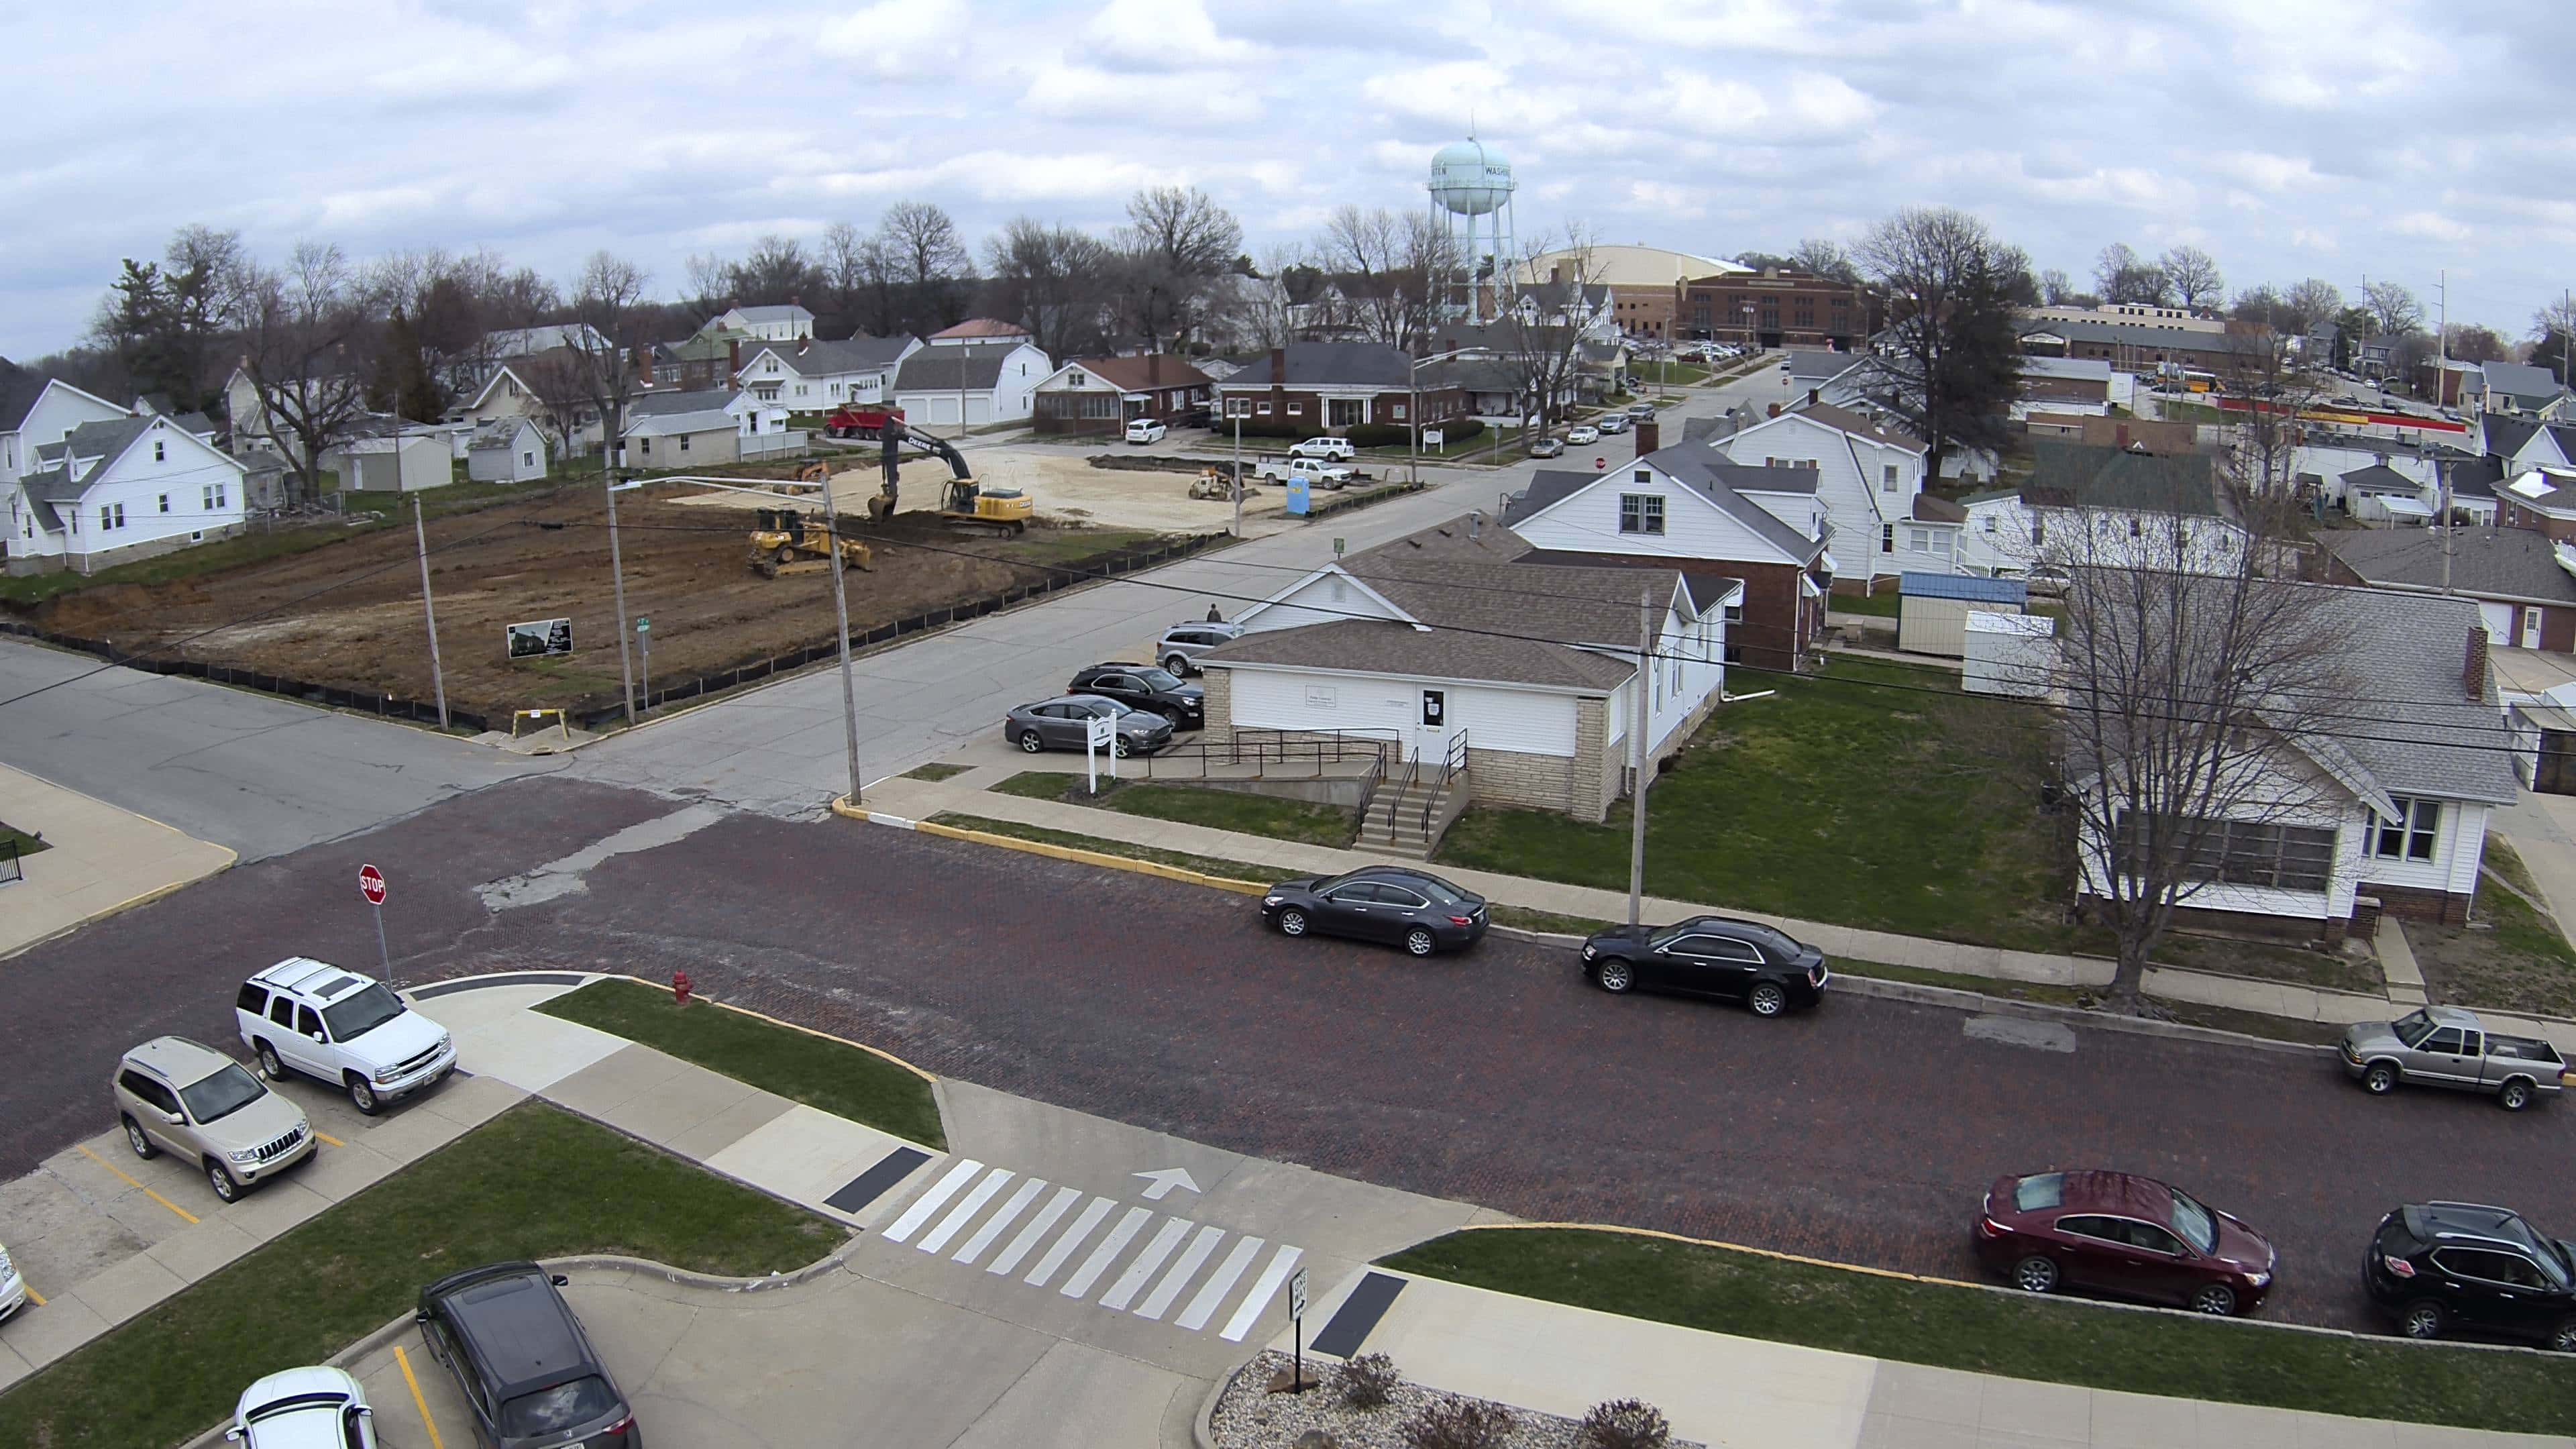 daviess-county-courthouse-annex-image-from-courthouse-webcam